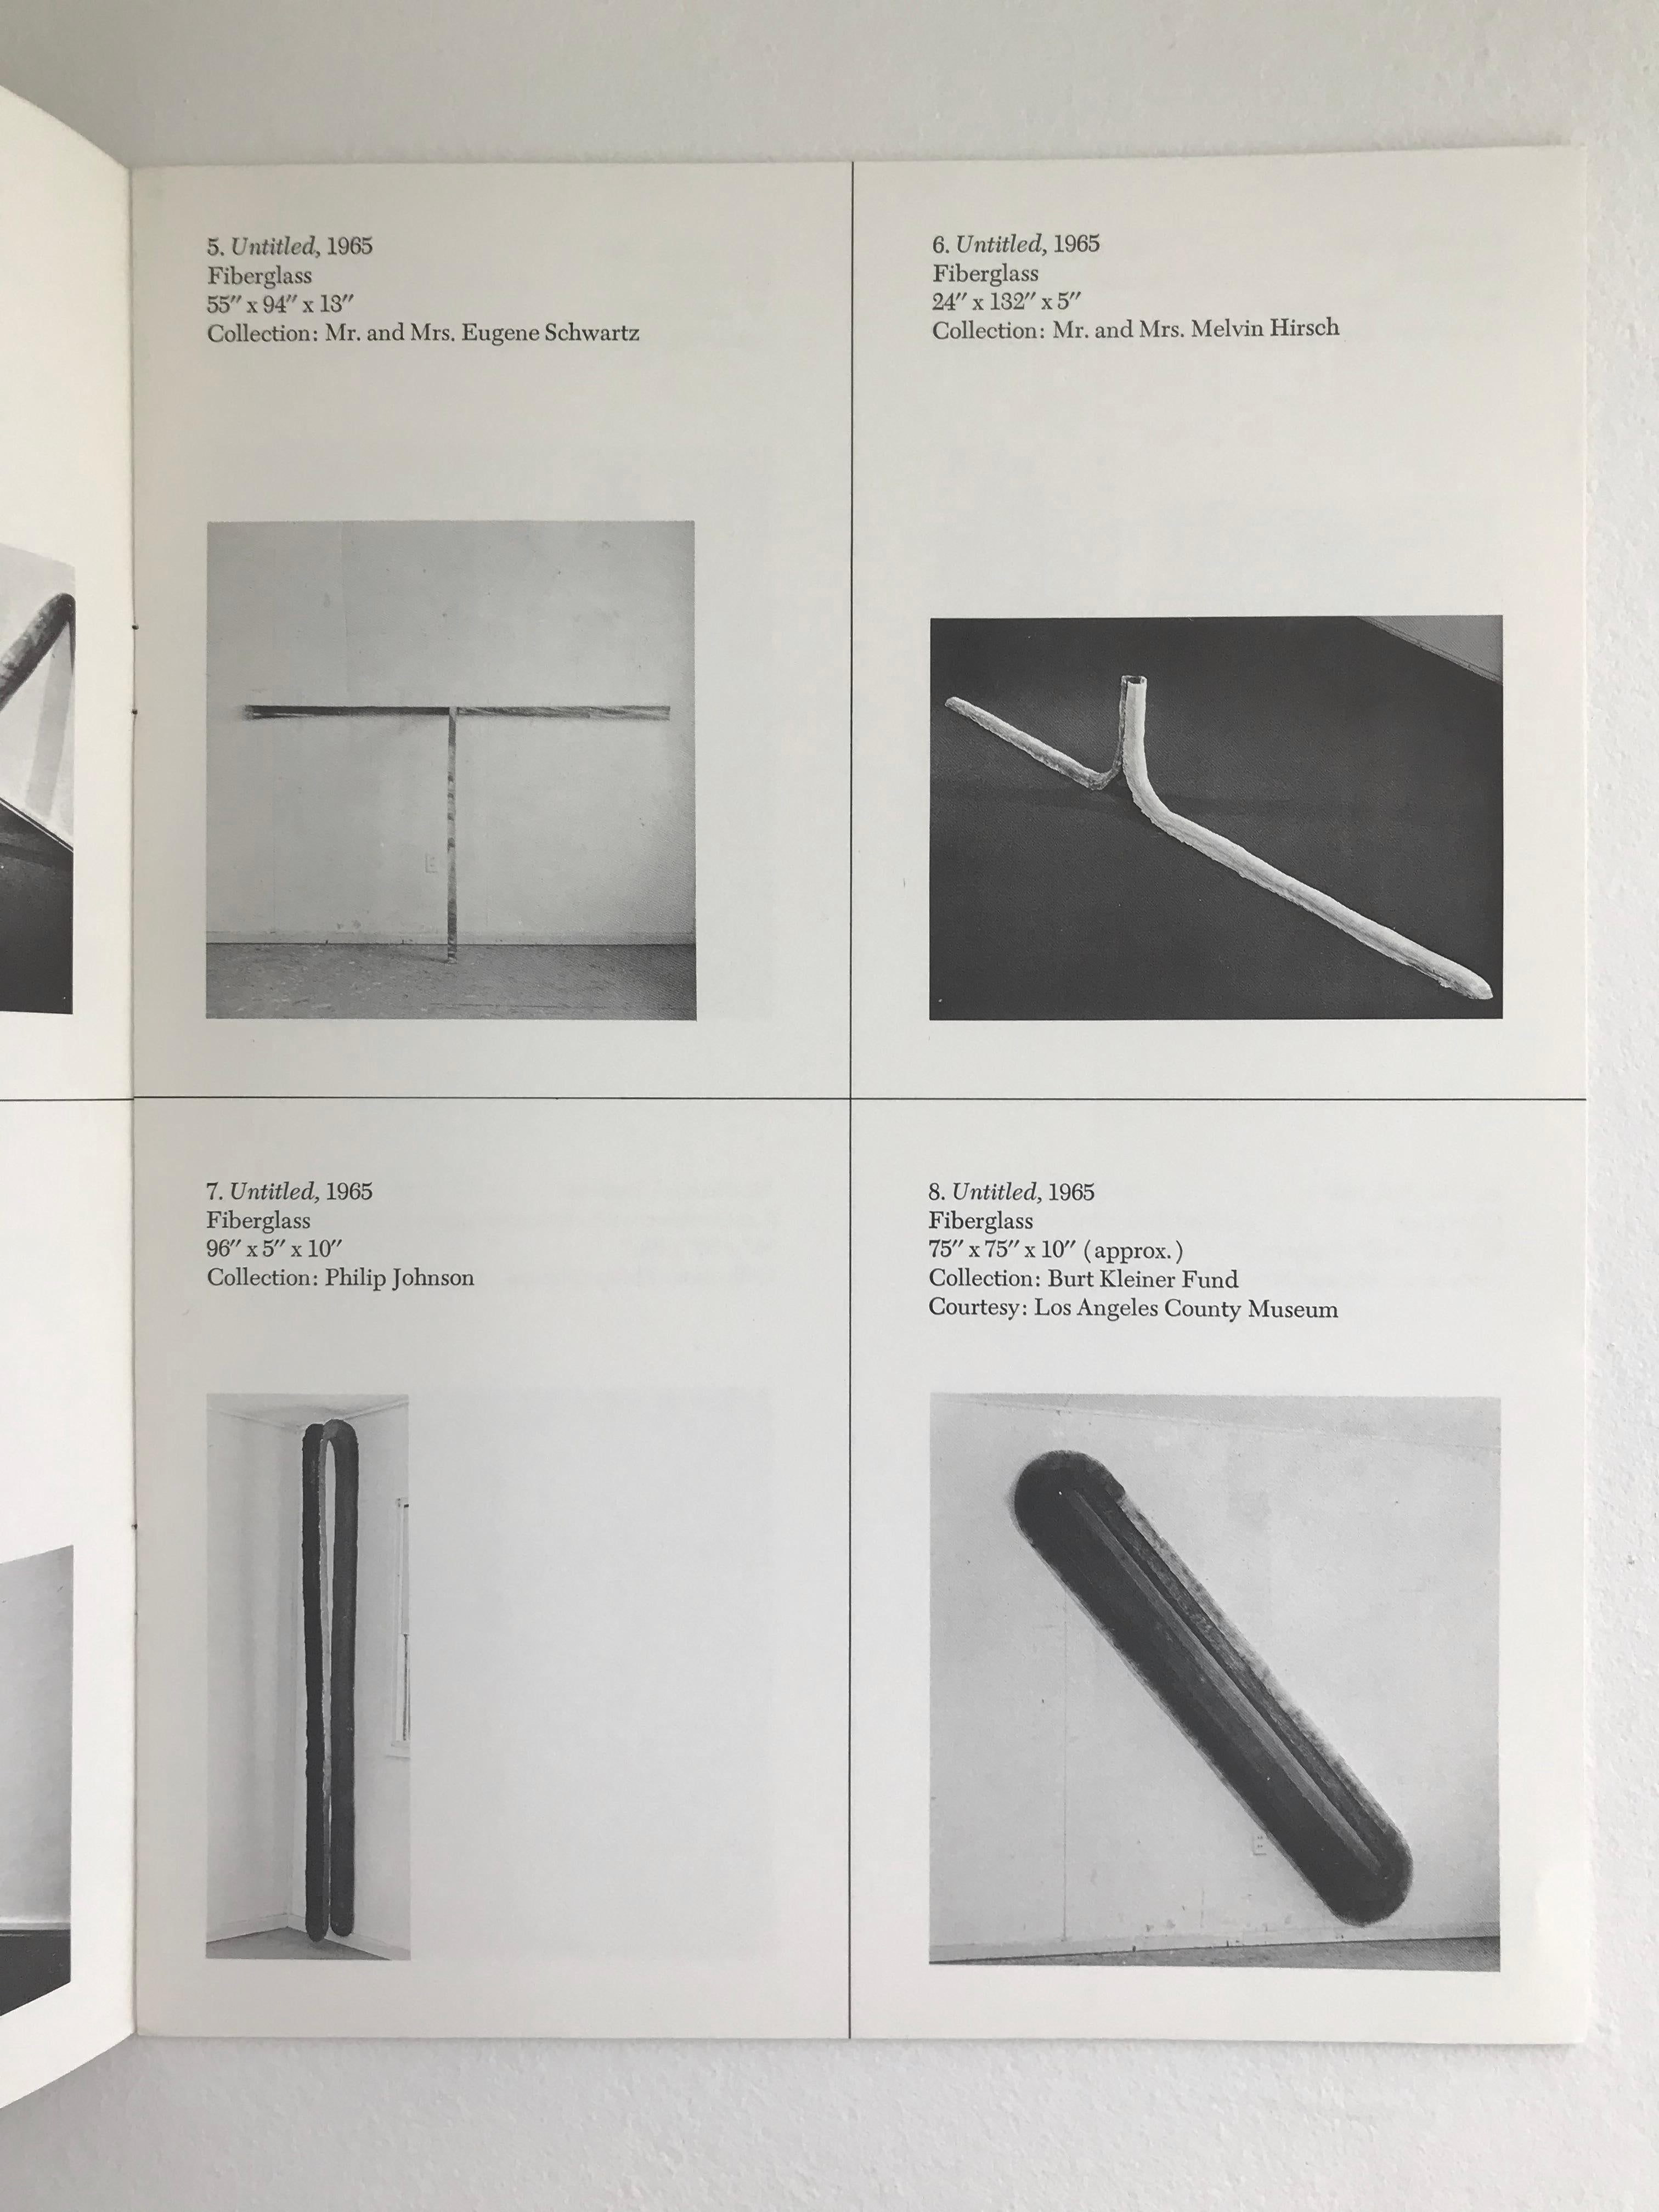 Bruce Nauman
Bruce Nauman, 1968
With notes by David Whitney
paperback, 12 pages with card stock cover, staple bound: 44 black and white illustrations
Published on the occasion of the artist’s first exhibition at Leo Castell, New York 27 January - 17